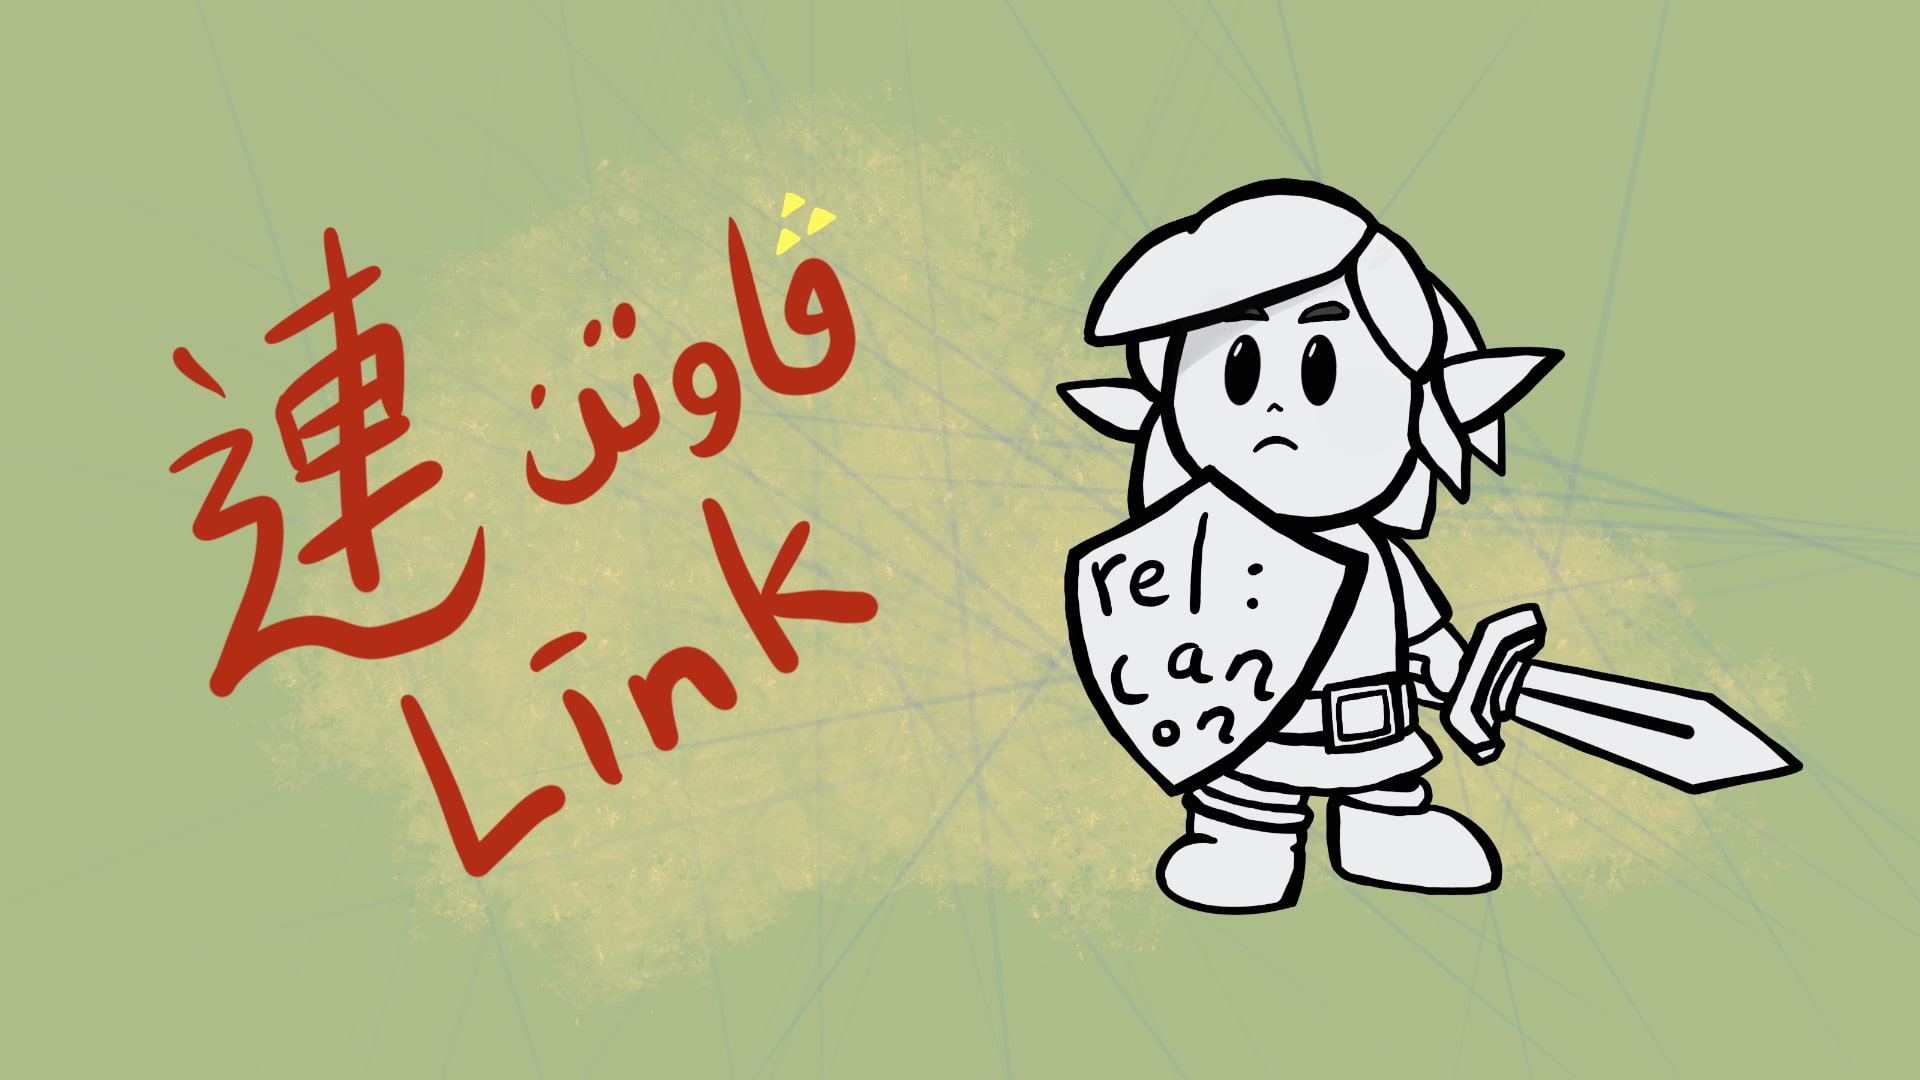 A doodle of Link from The Legend of Zelda with the word link in Chinese, Malay, and English on the left.